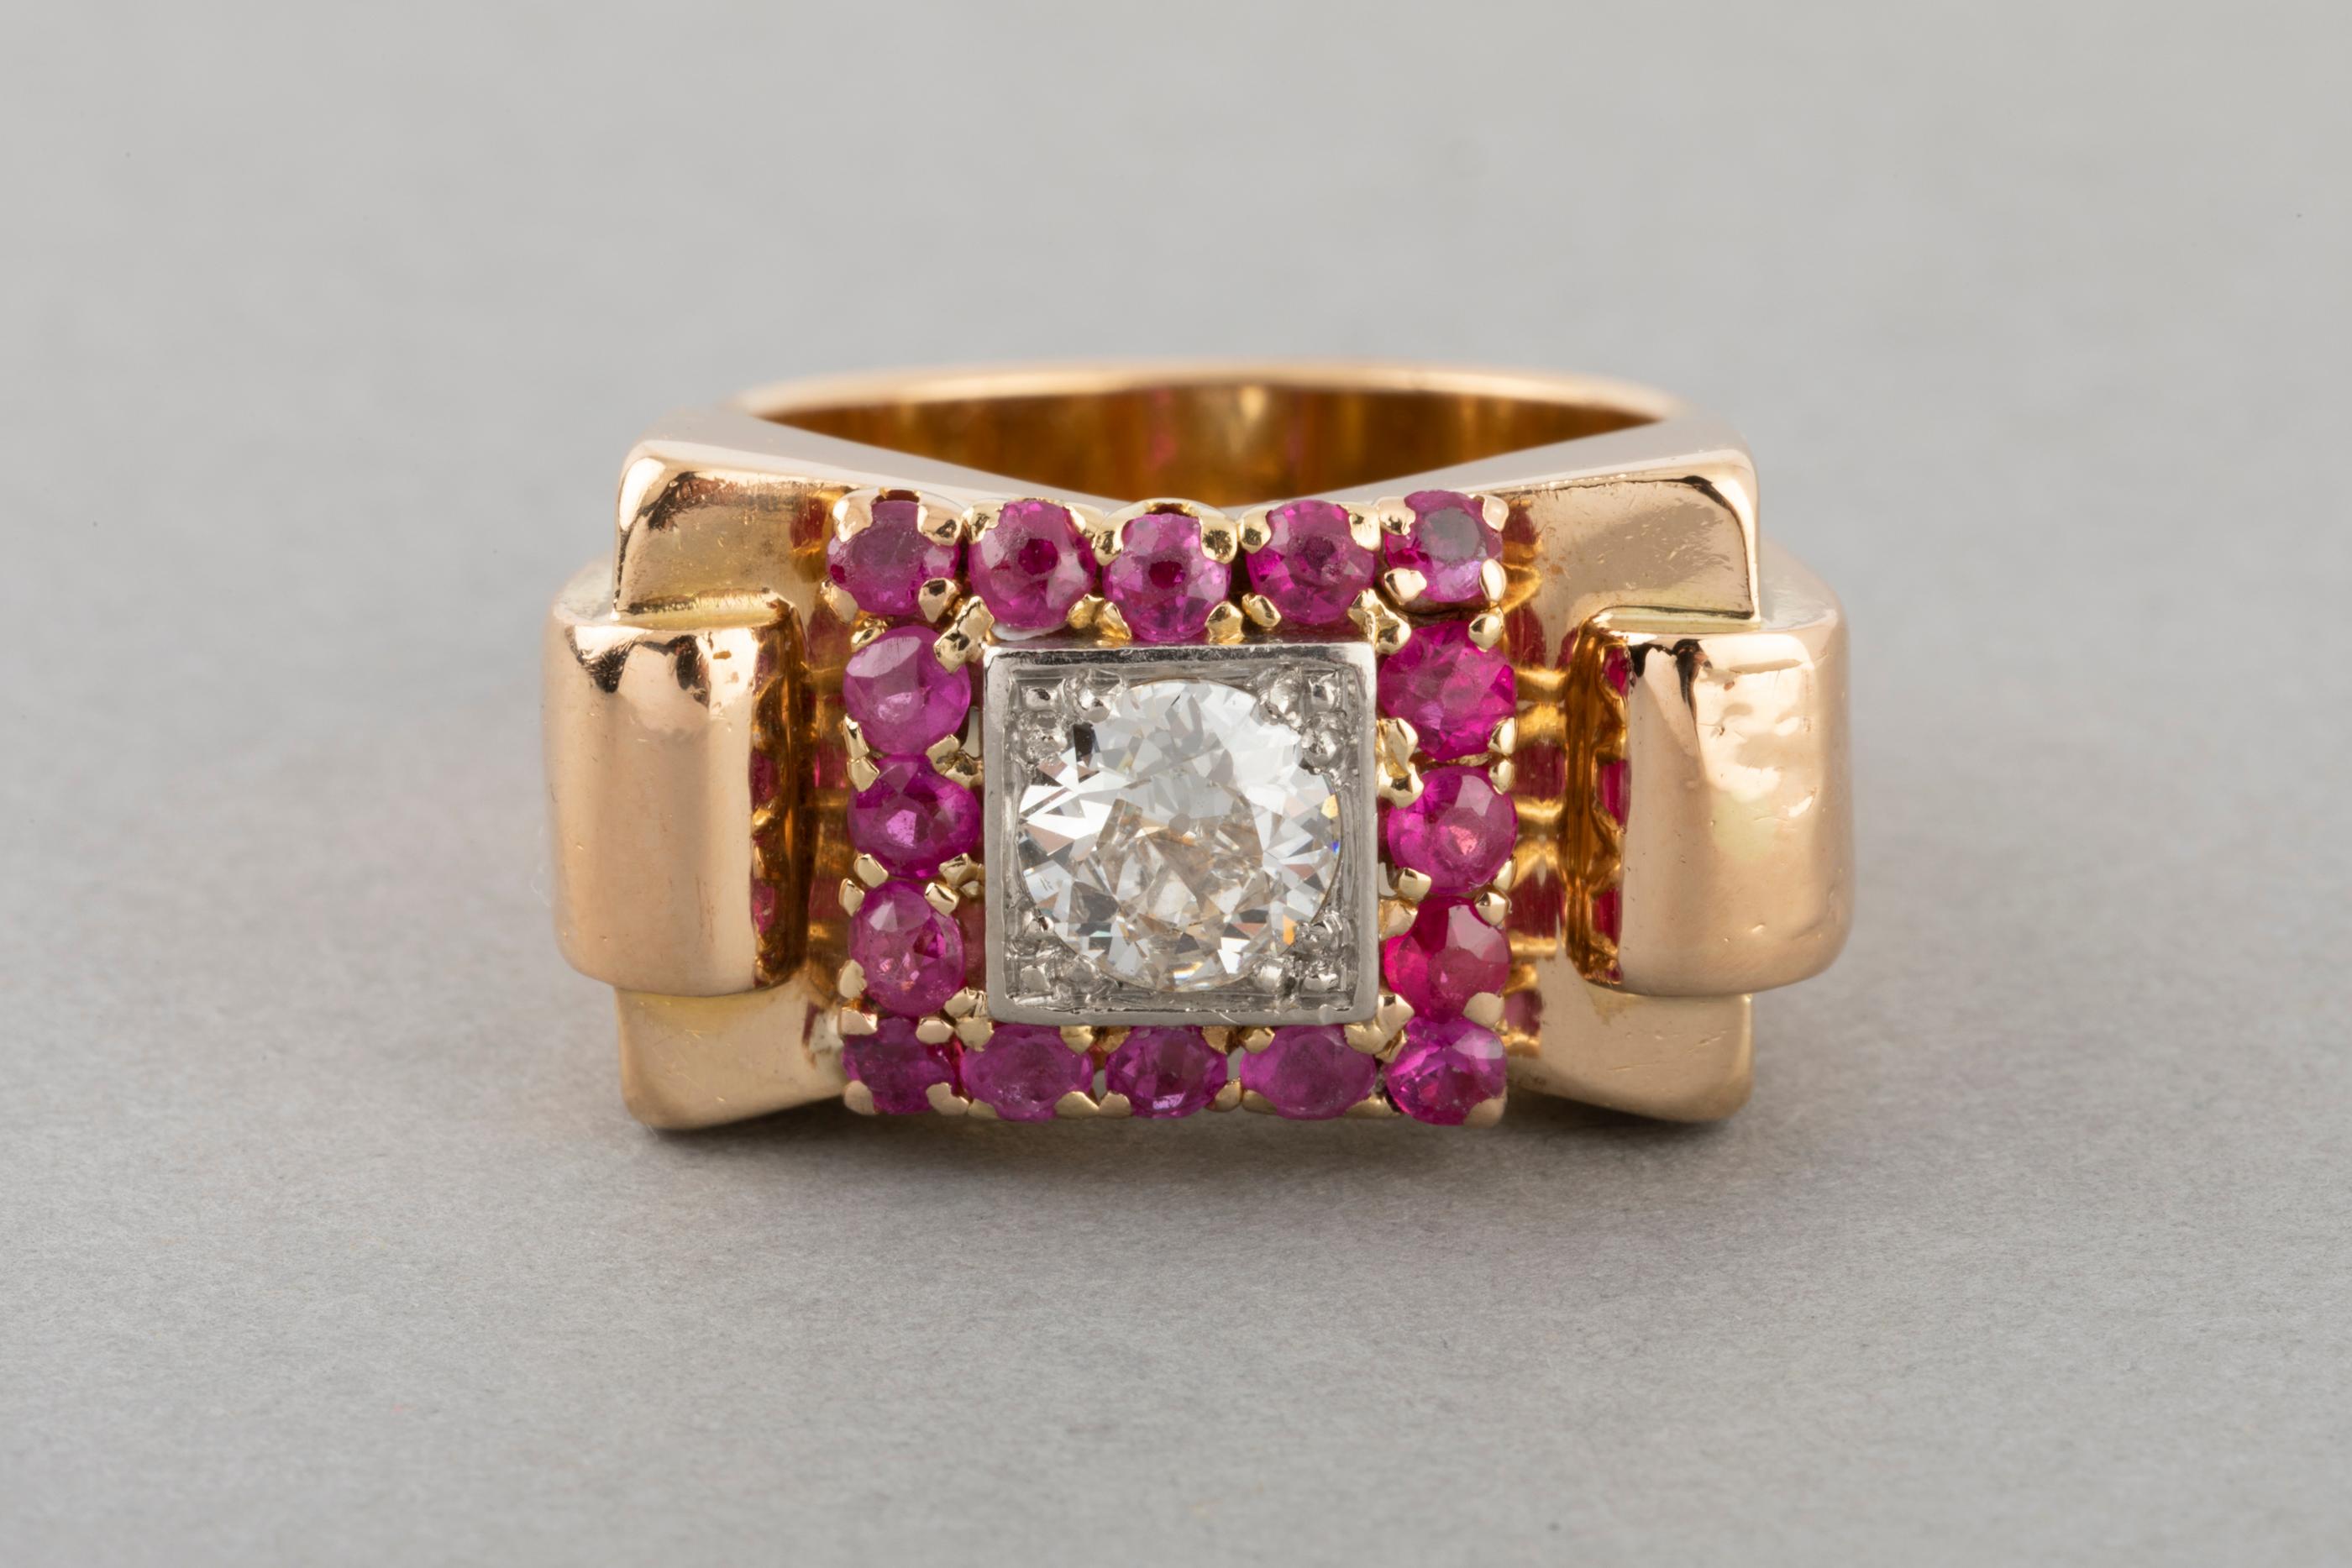 Gold and Diamonds French Retro Ring  
Very beautiful ring, made in France in the 1940's. The design is still fashion and modern. Made in yellow gold 18k, platinum, diamond and red stones. 
The ring is big and has presence, it weight 9.73 grams. 
The